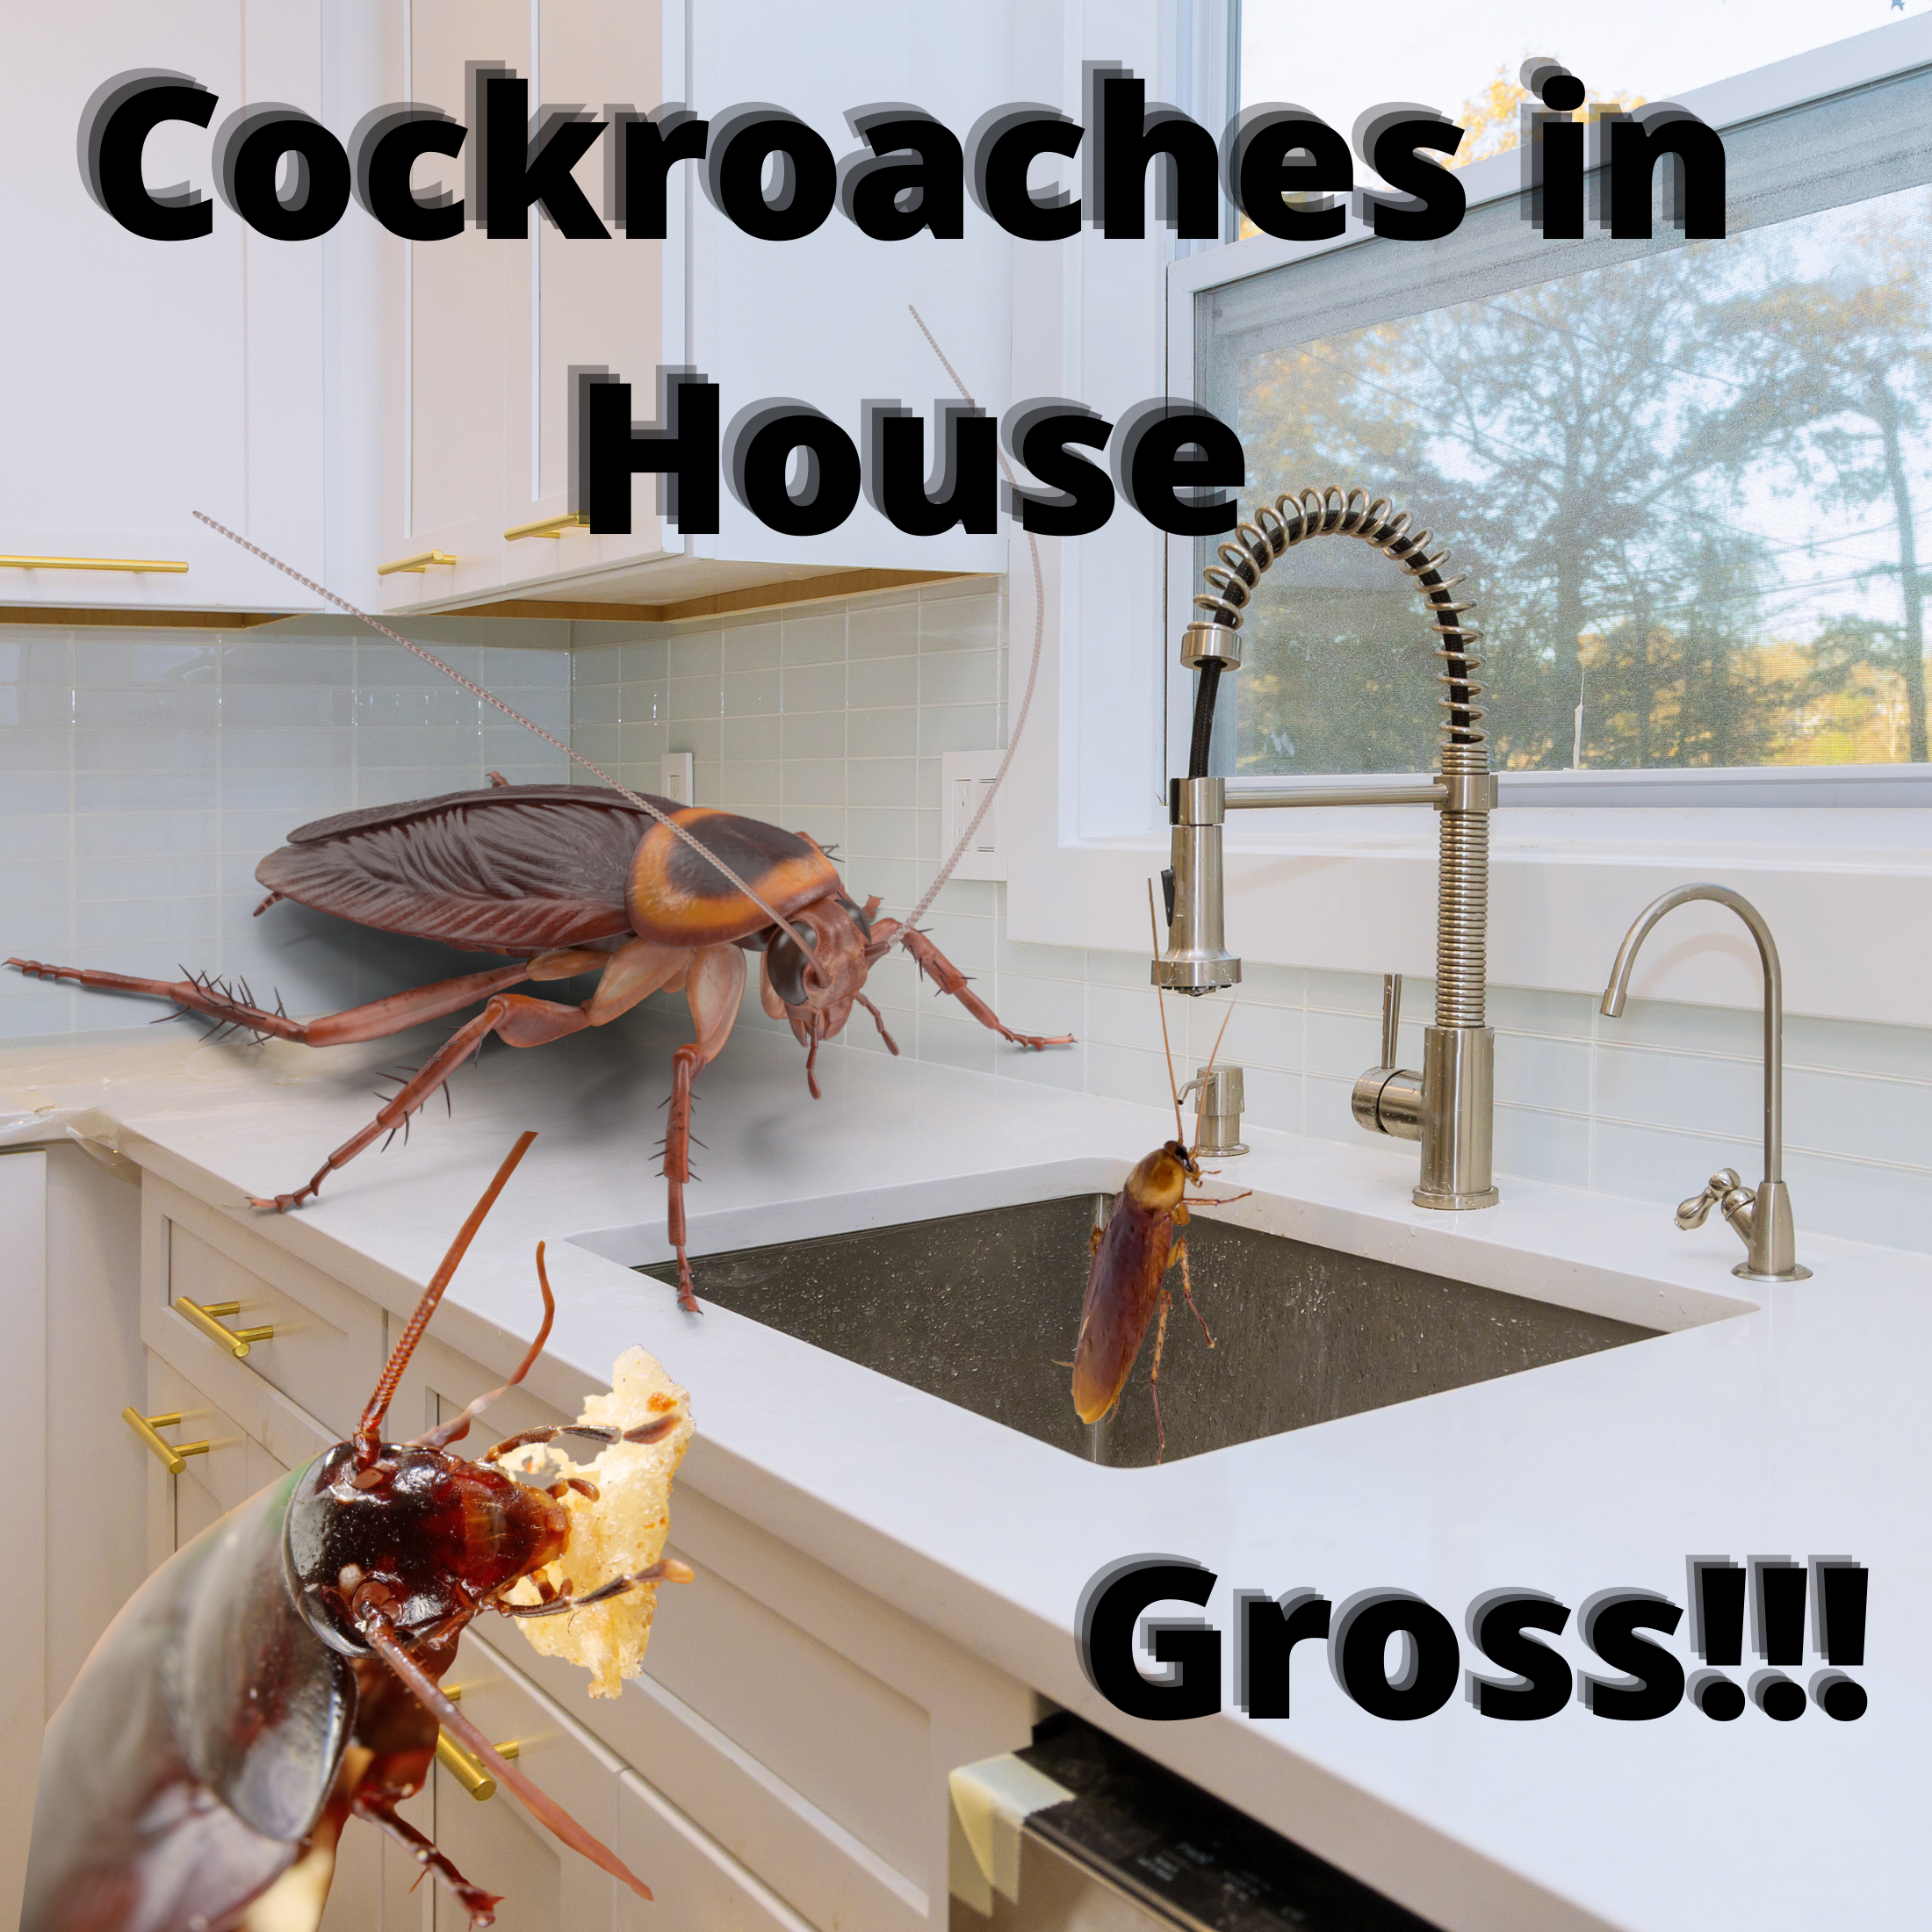 Too many cockroaches in the house – What does it indicate?